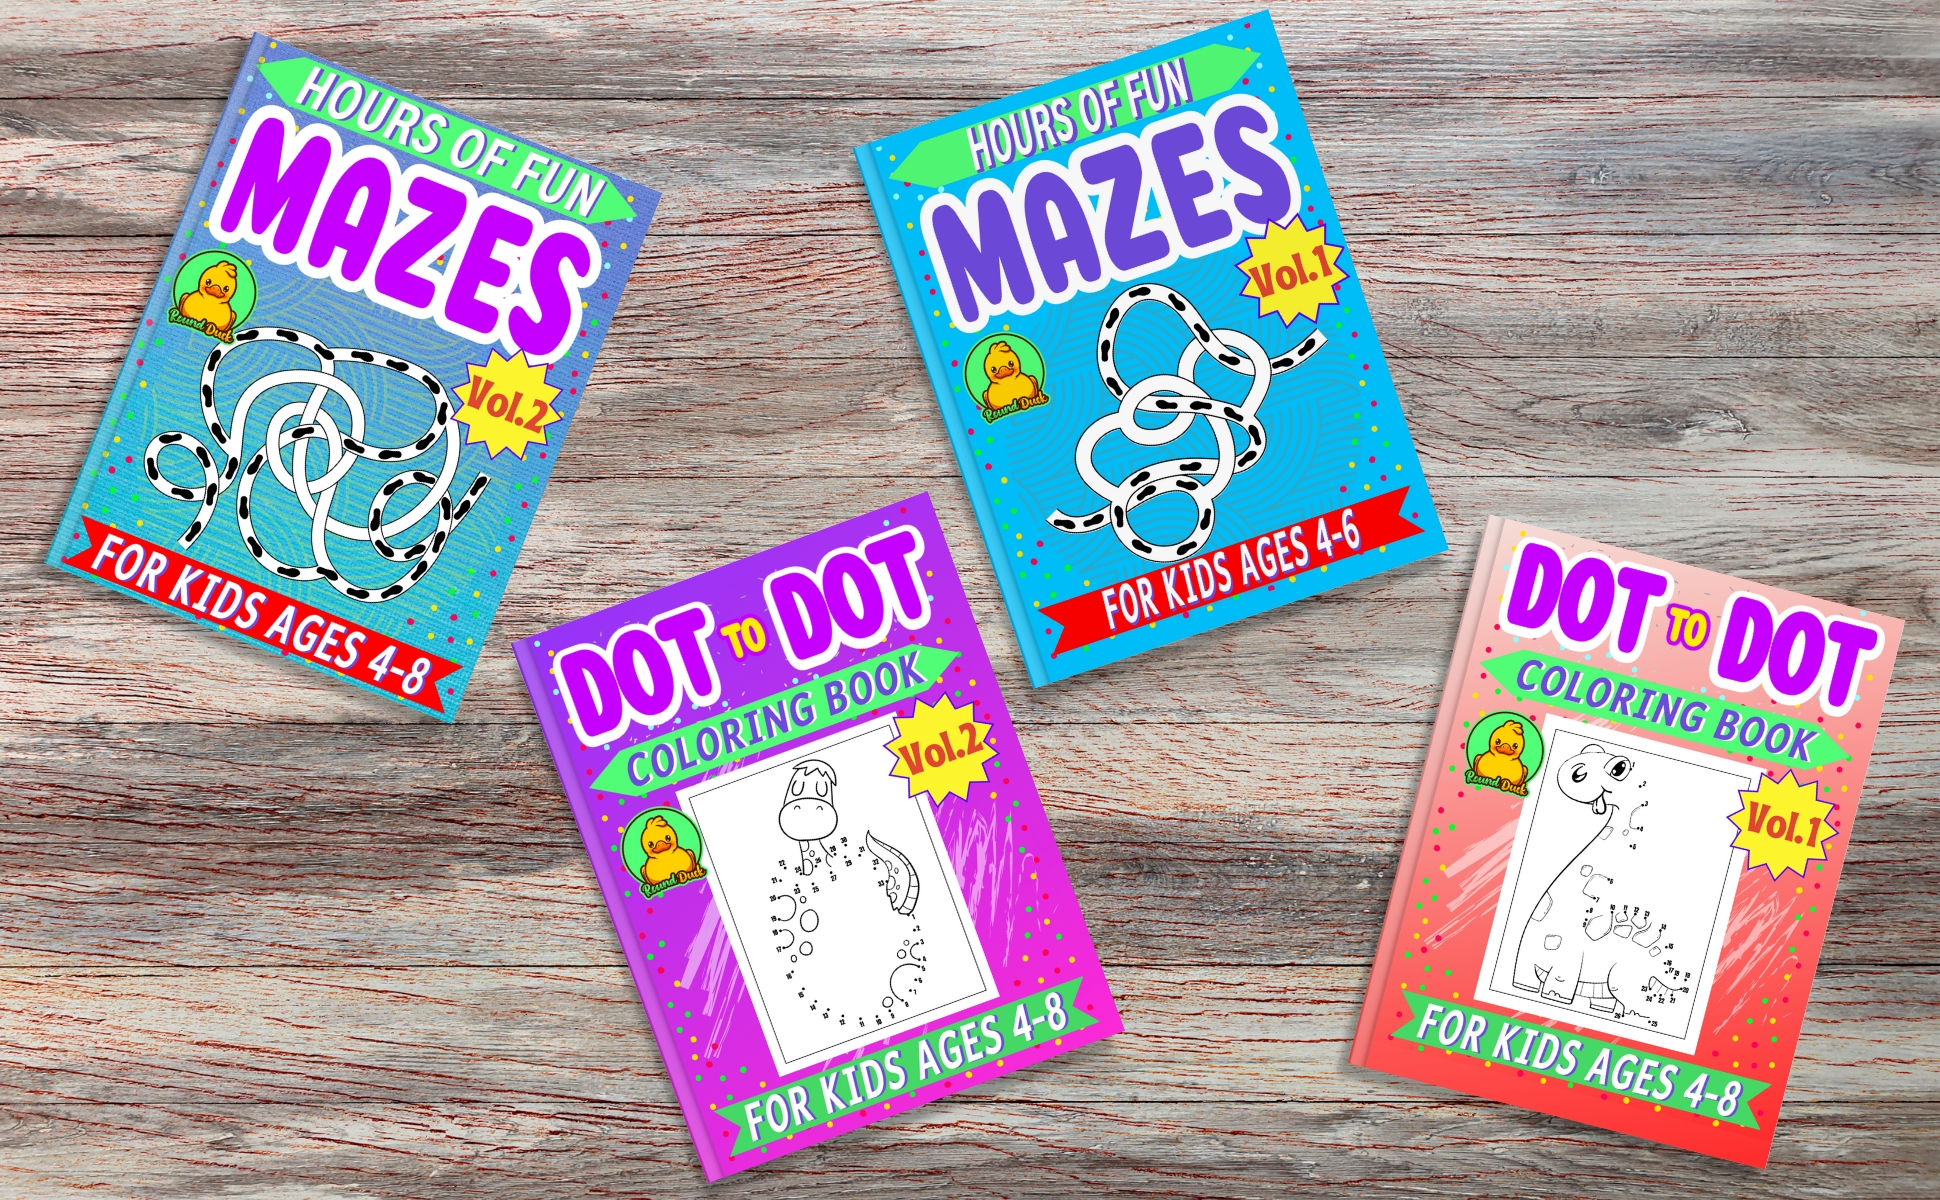 Dot to Dot and Mazes books for Kids